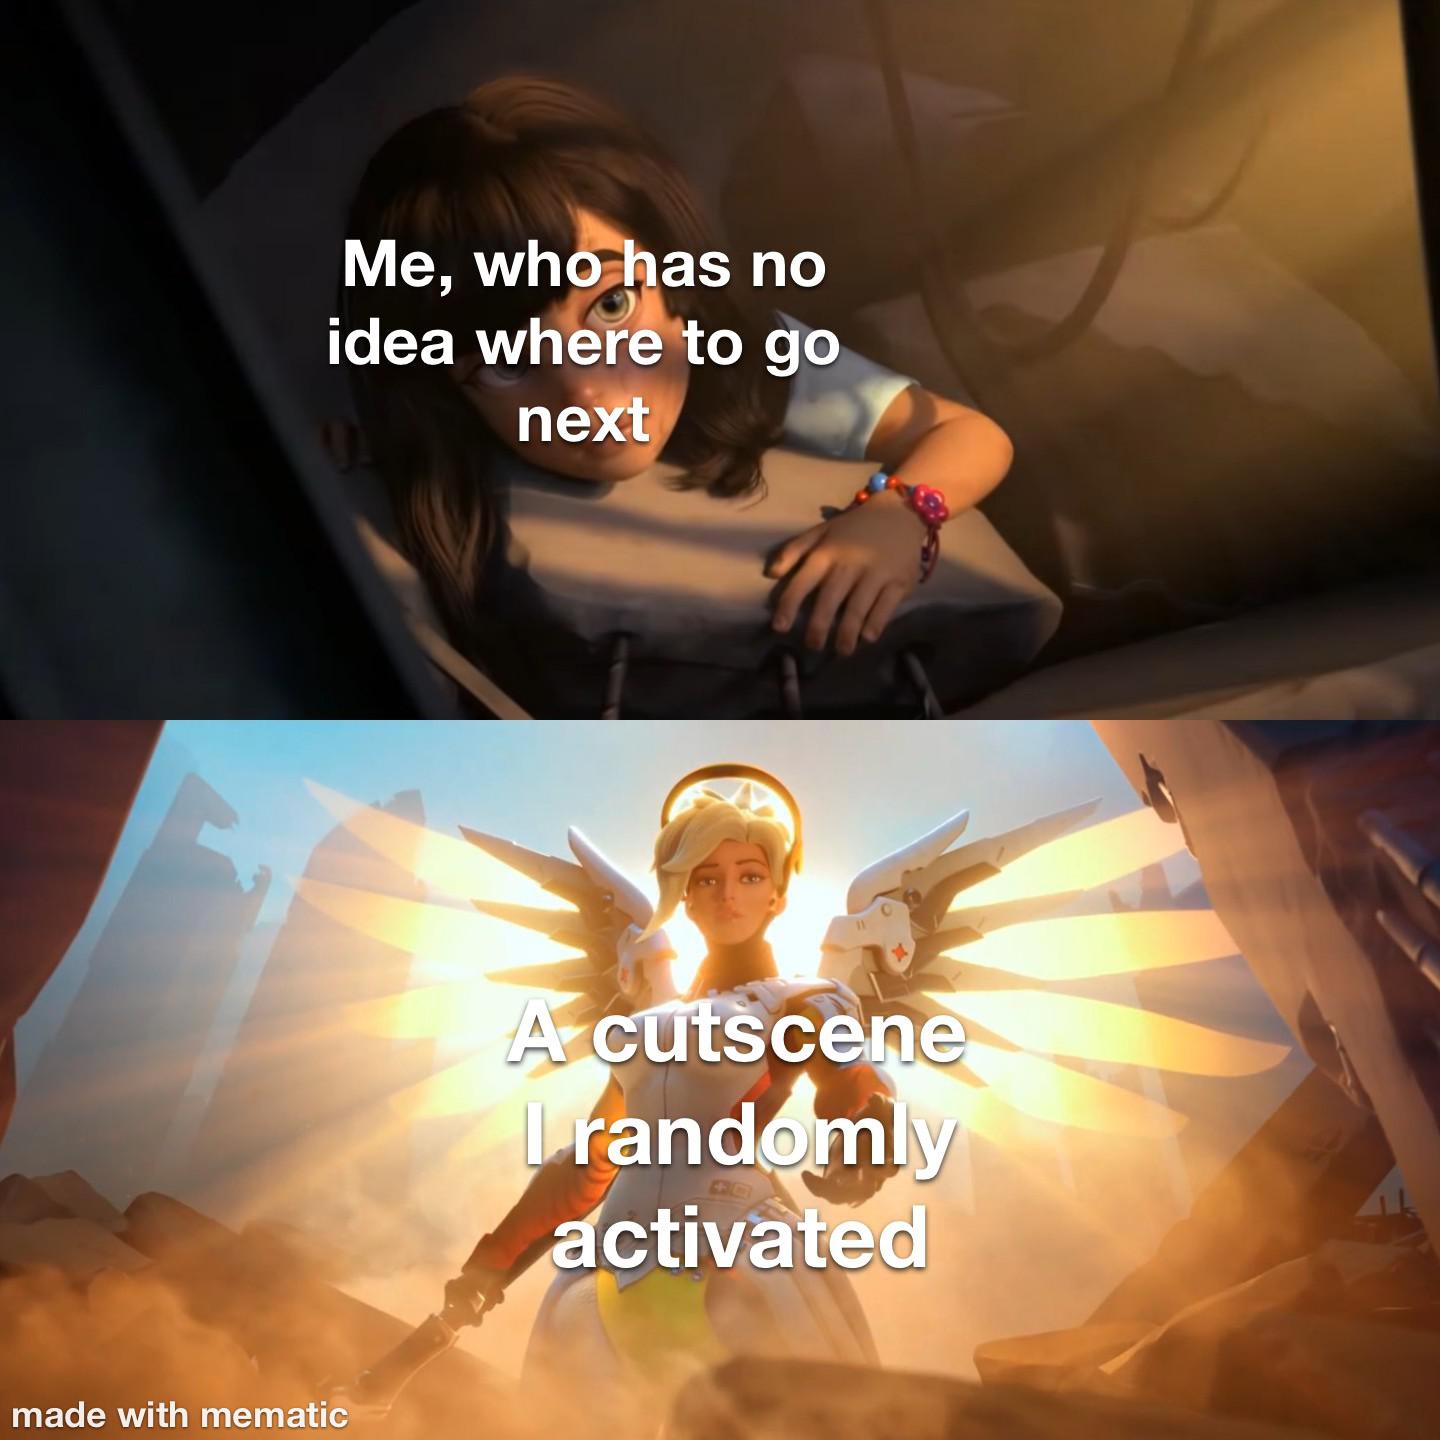 overwatch mercy meme template - Me, who has no idea where to go next A cutscene I randomly activated made with mematic